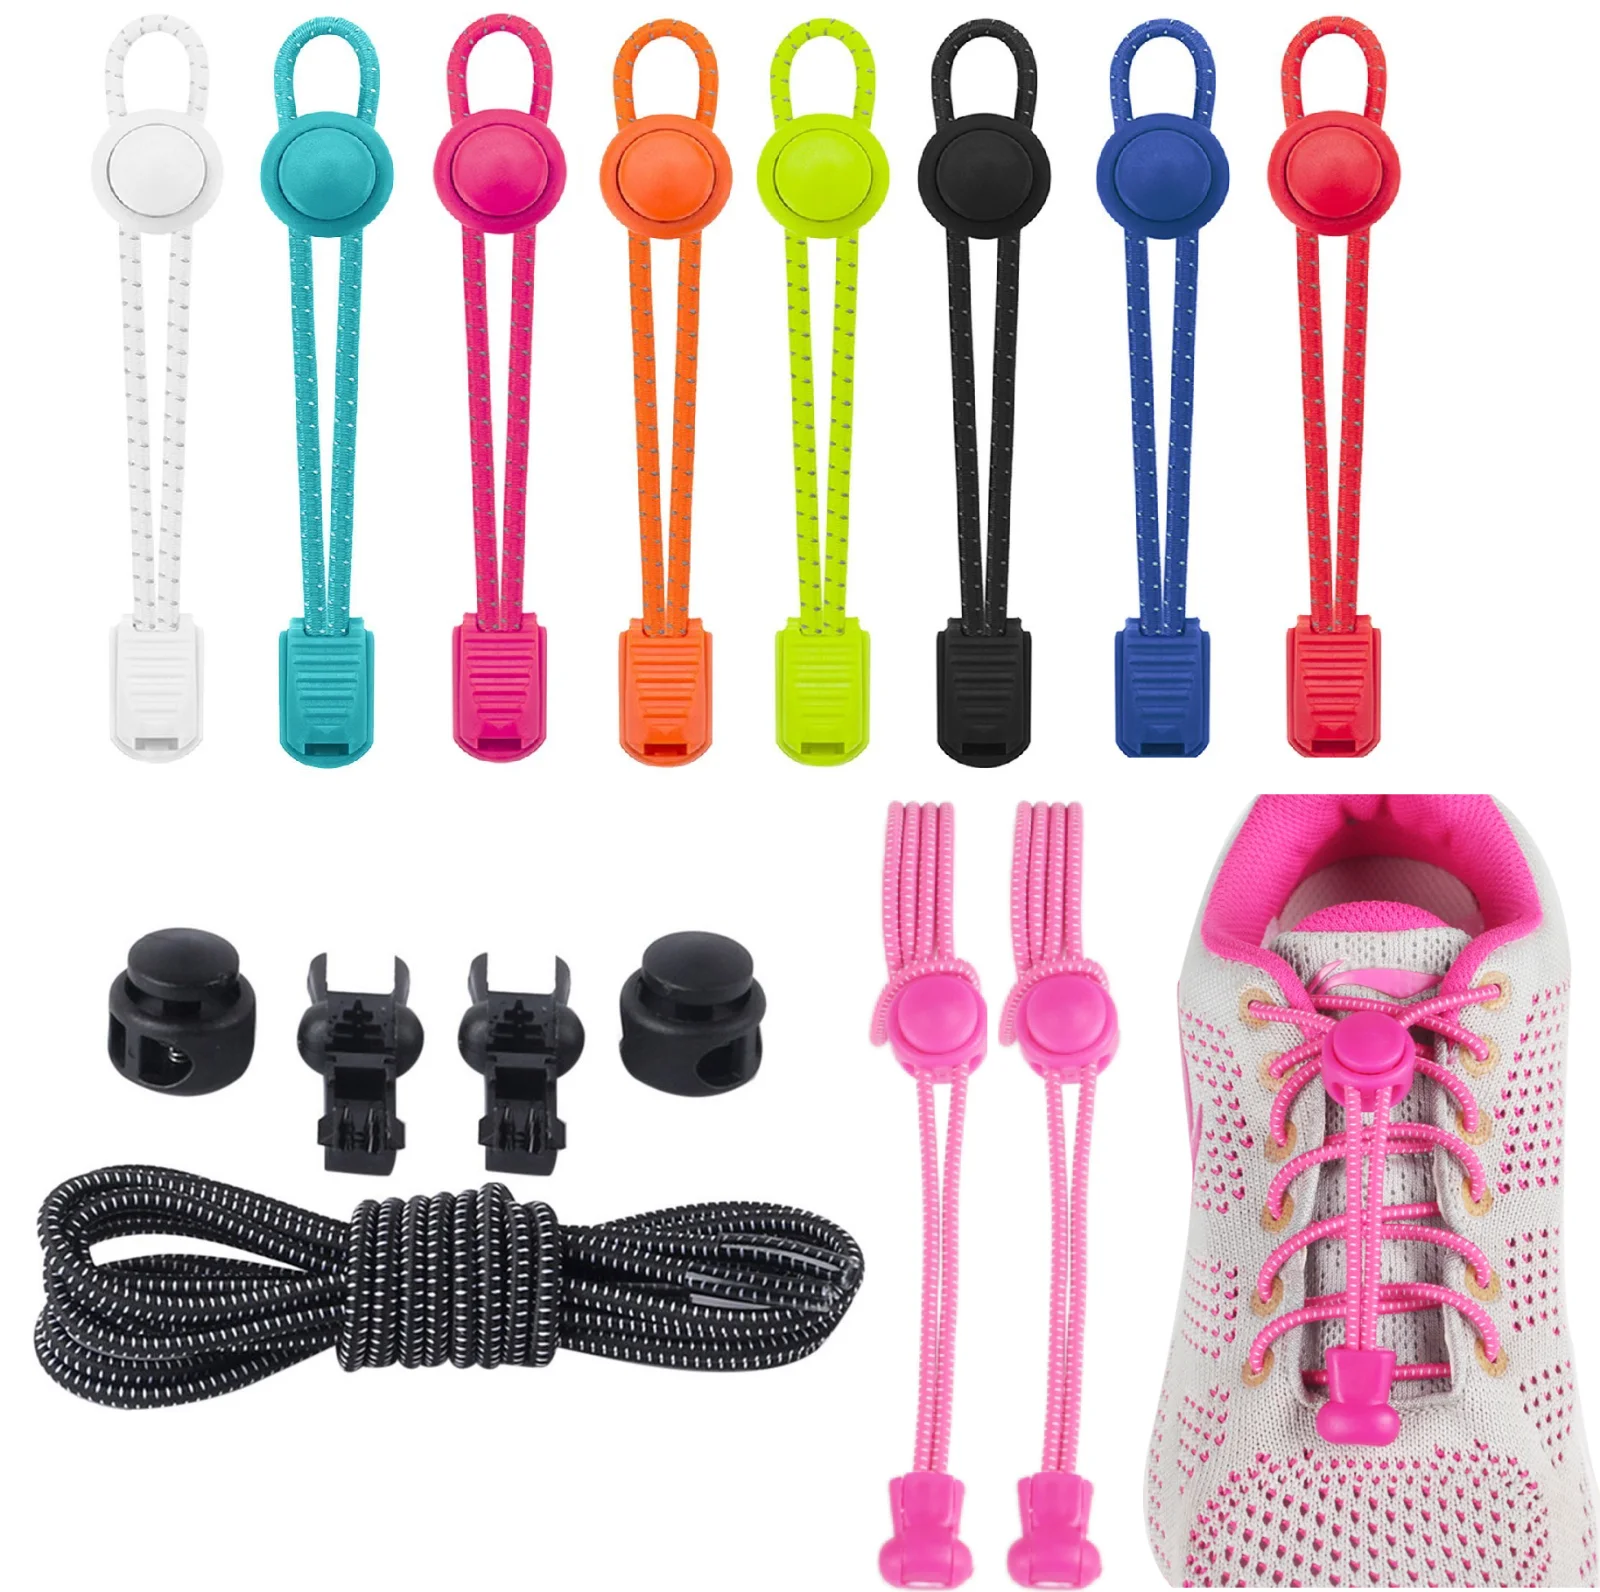 No Tie Shoe Laces Elastic Lock Lace System Sports Runners Trainer Shoelaces 